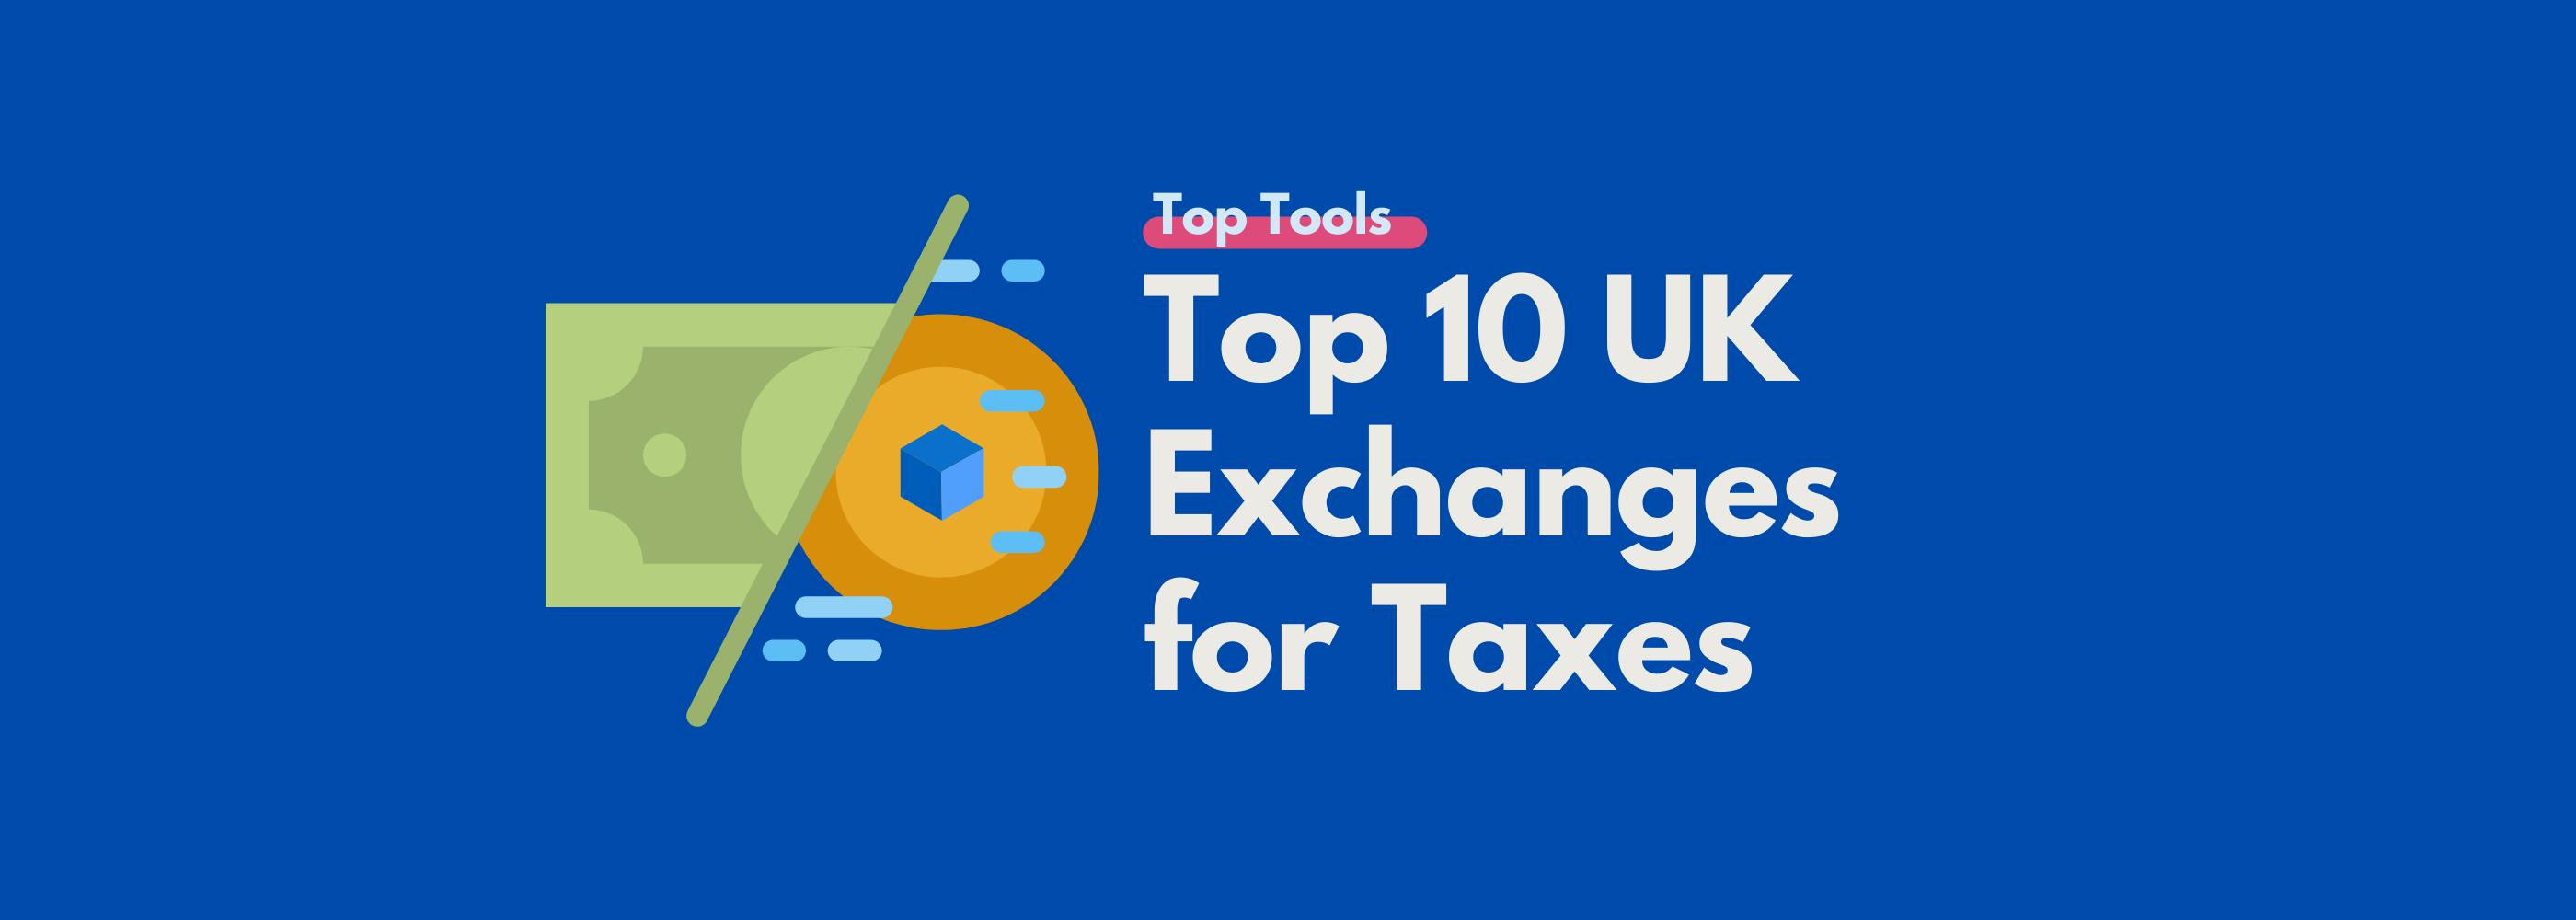 uk digital services tax targets crypto exchanges